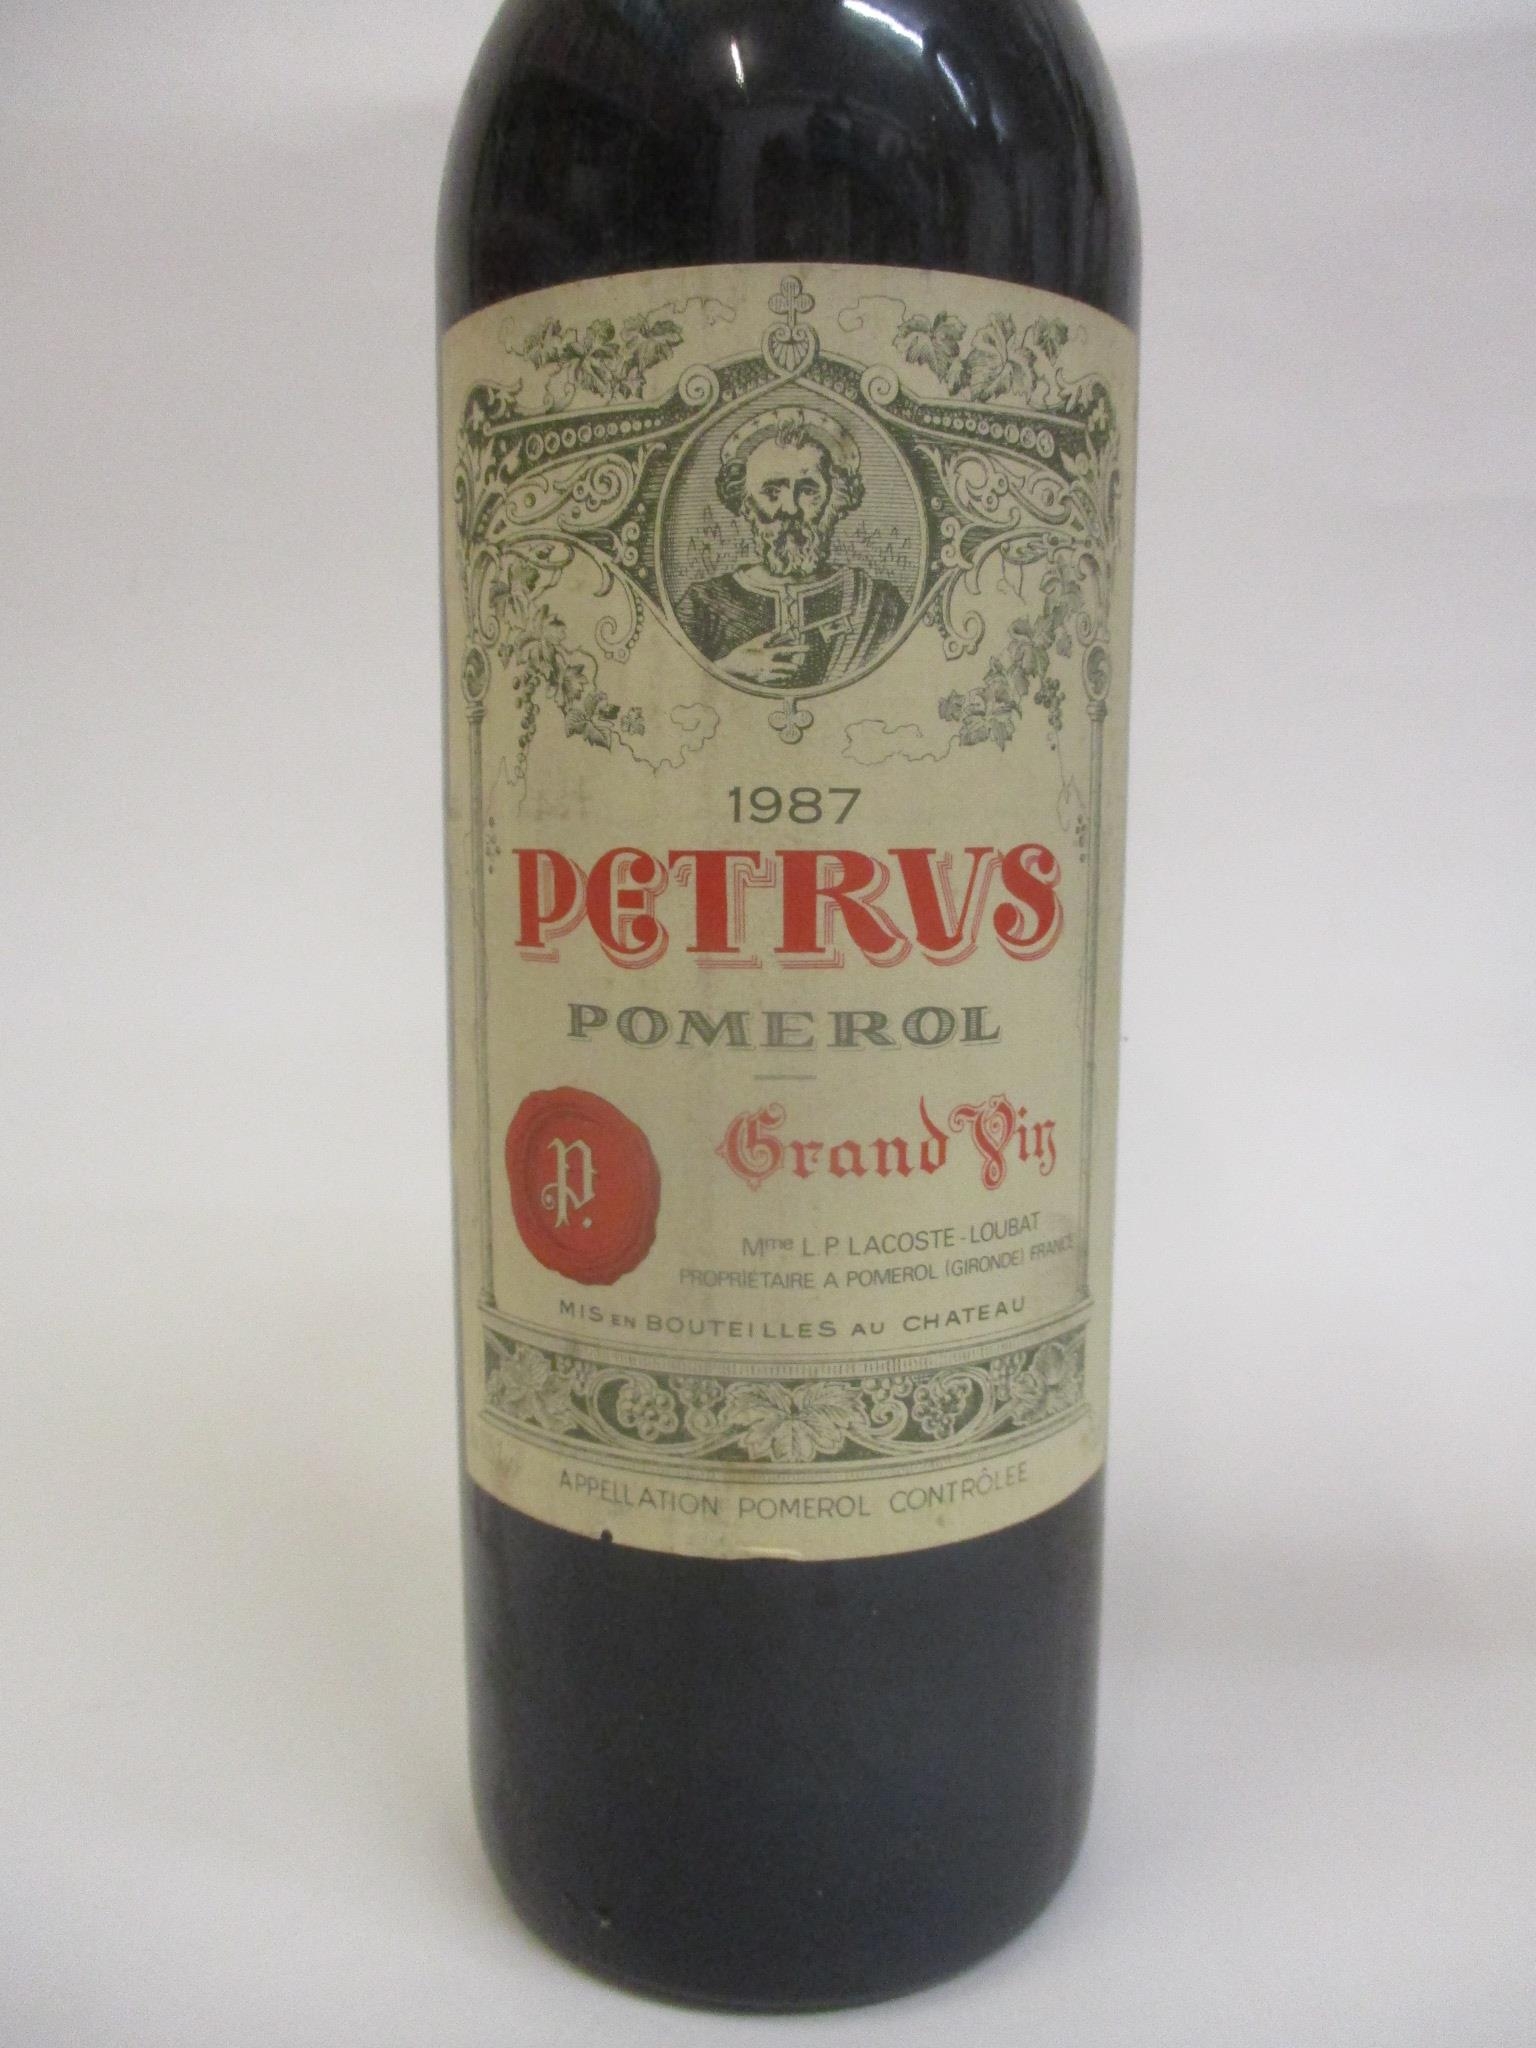 One bottle of Petrus Pomerol Grand Vin, 1987, 75cl - Image 2 of 3